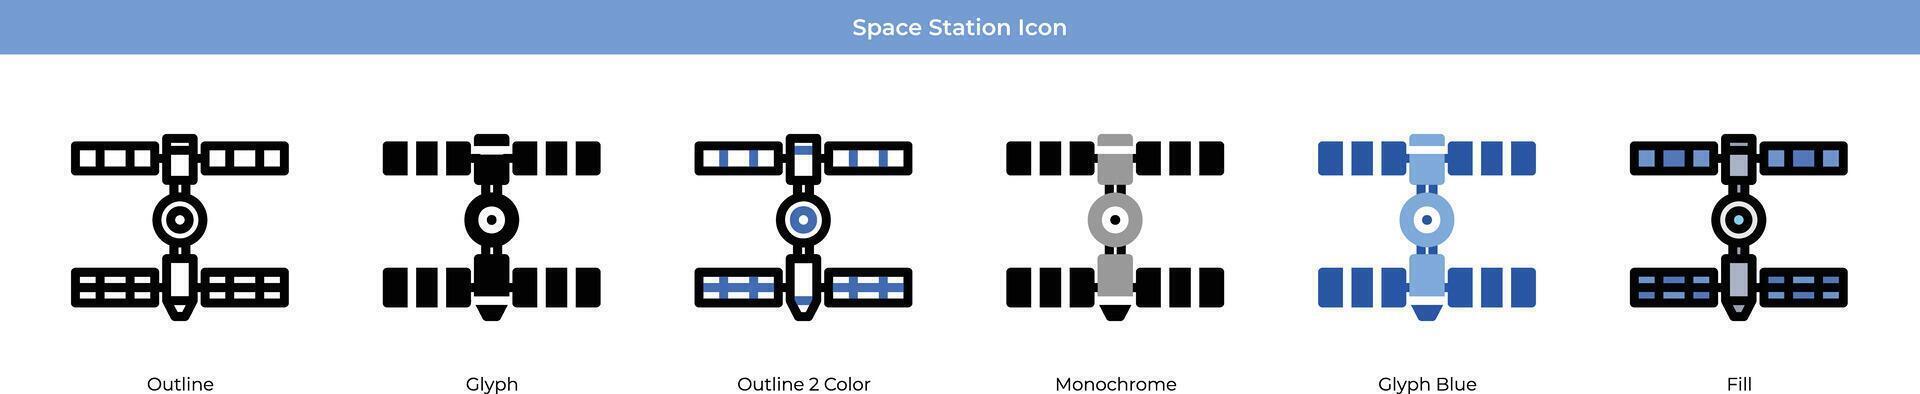 Space Station Icon Set vector